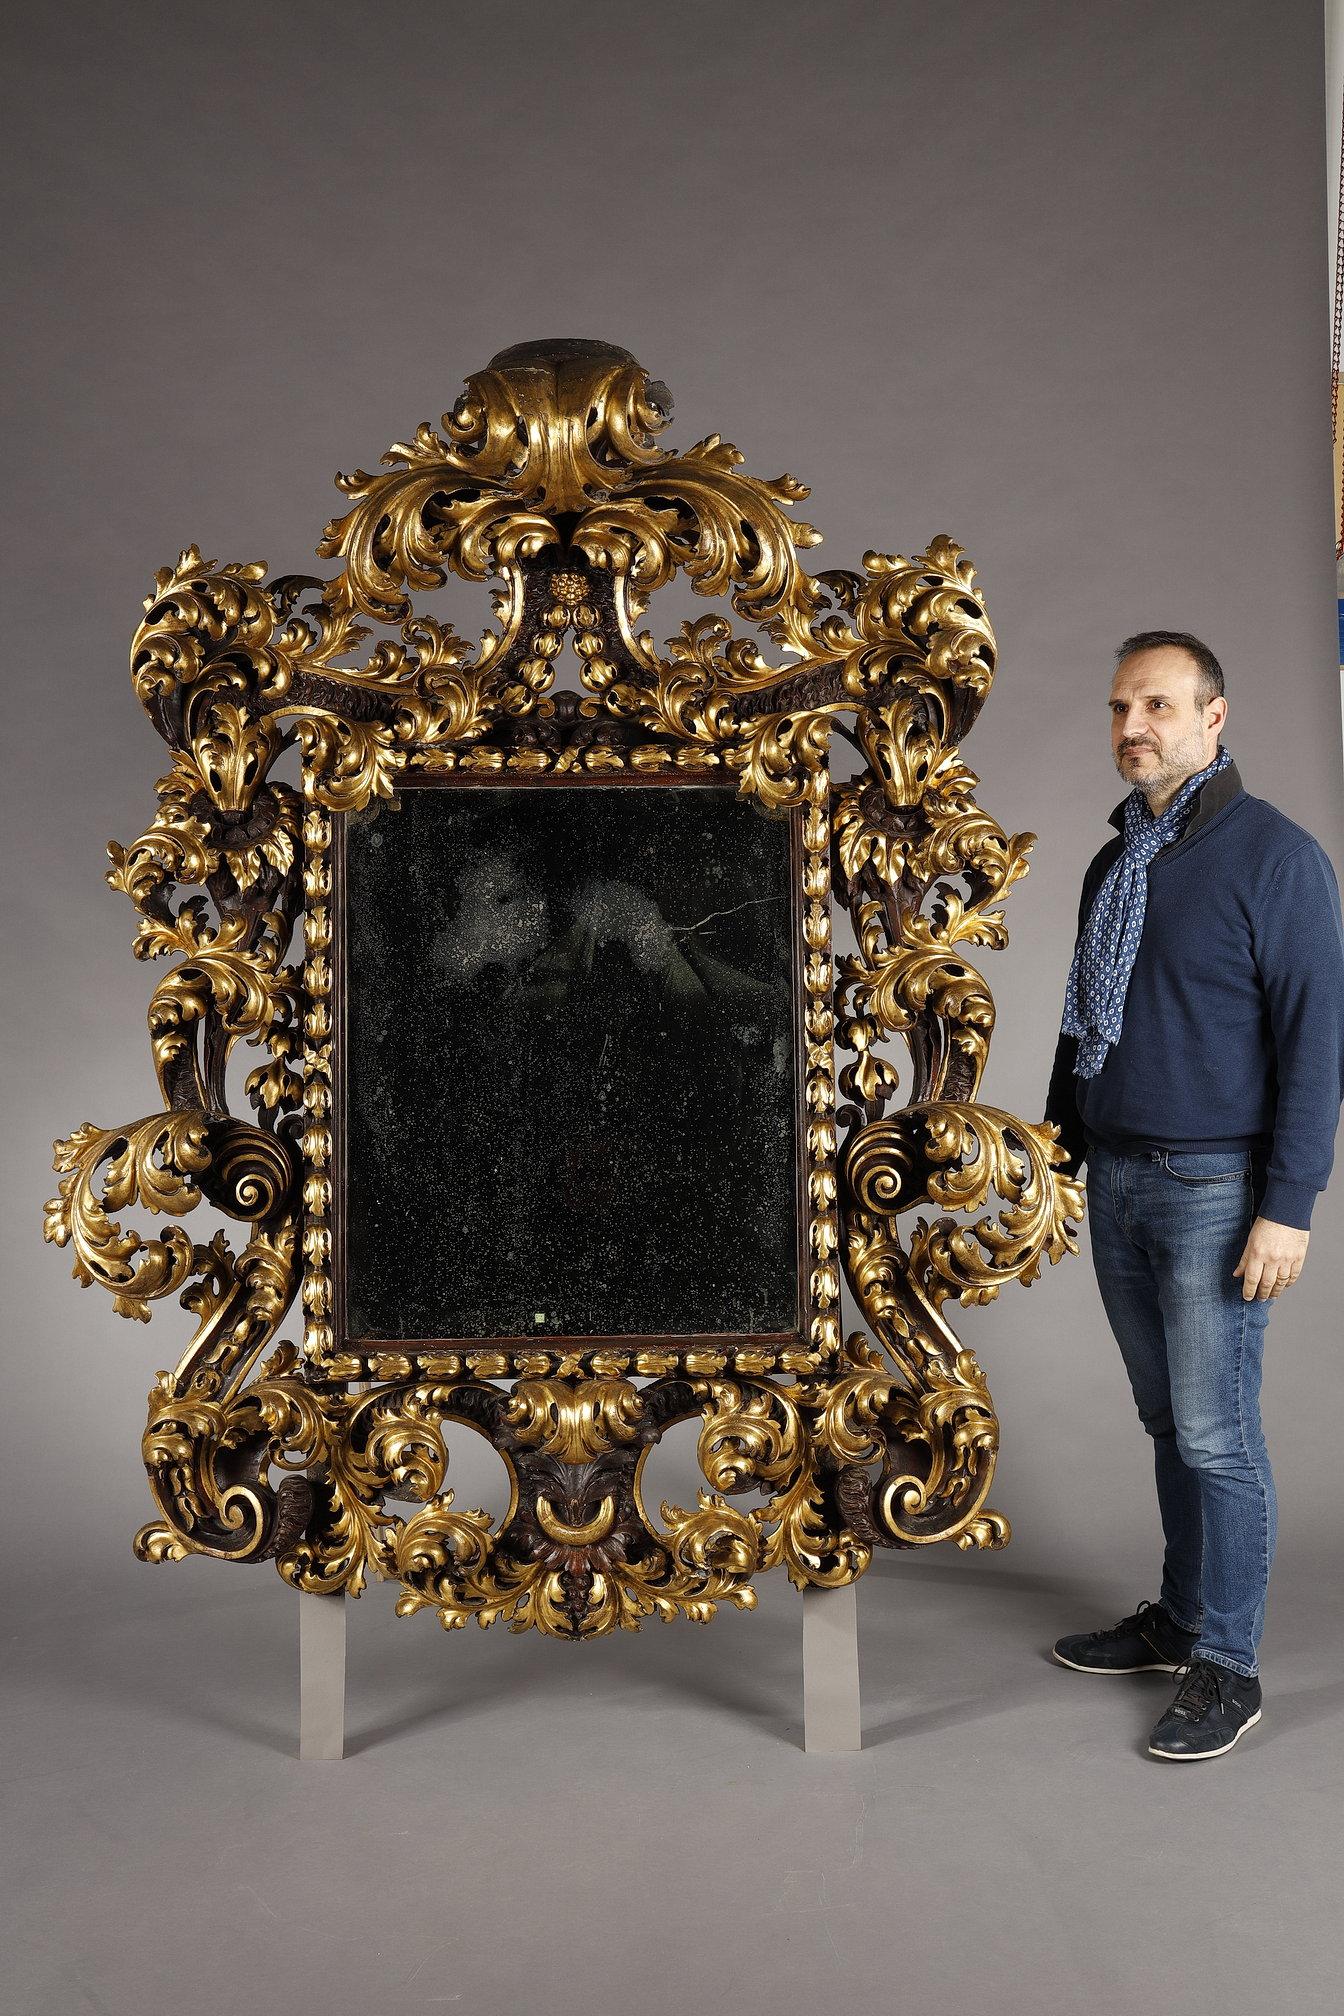 Very important mirror frame in carved, gilded and patinated wood with rich acanthus leaf and scroll decoration in beautiful symmetry around a rectangular frame containing a silver mercury mirror.

Italian work, particularly Roman, from the late 17th